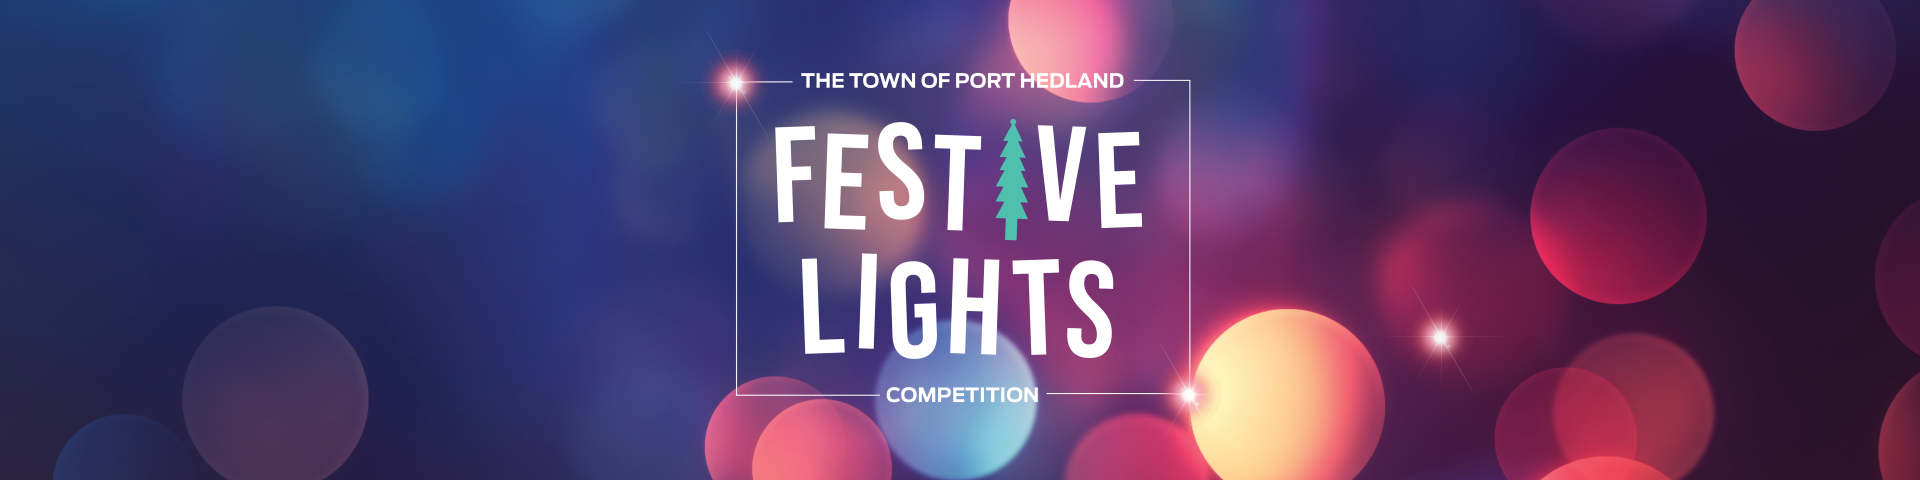 Get ready for the 2021 Festive Lights Competition